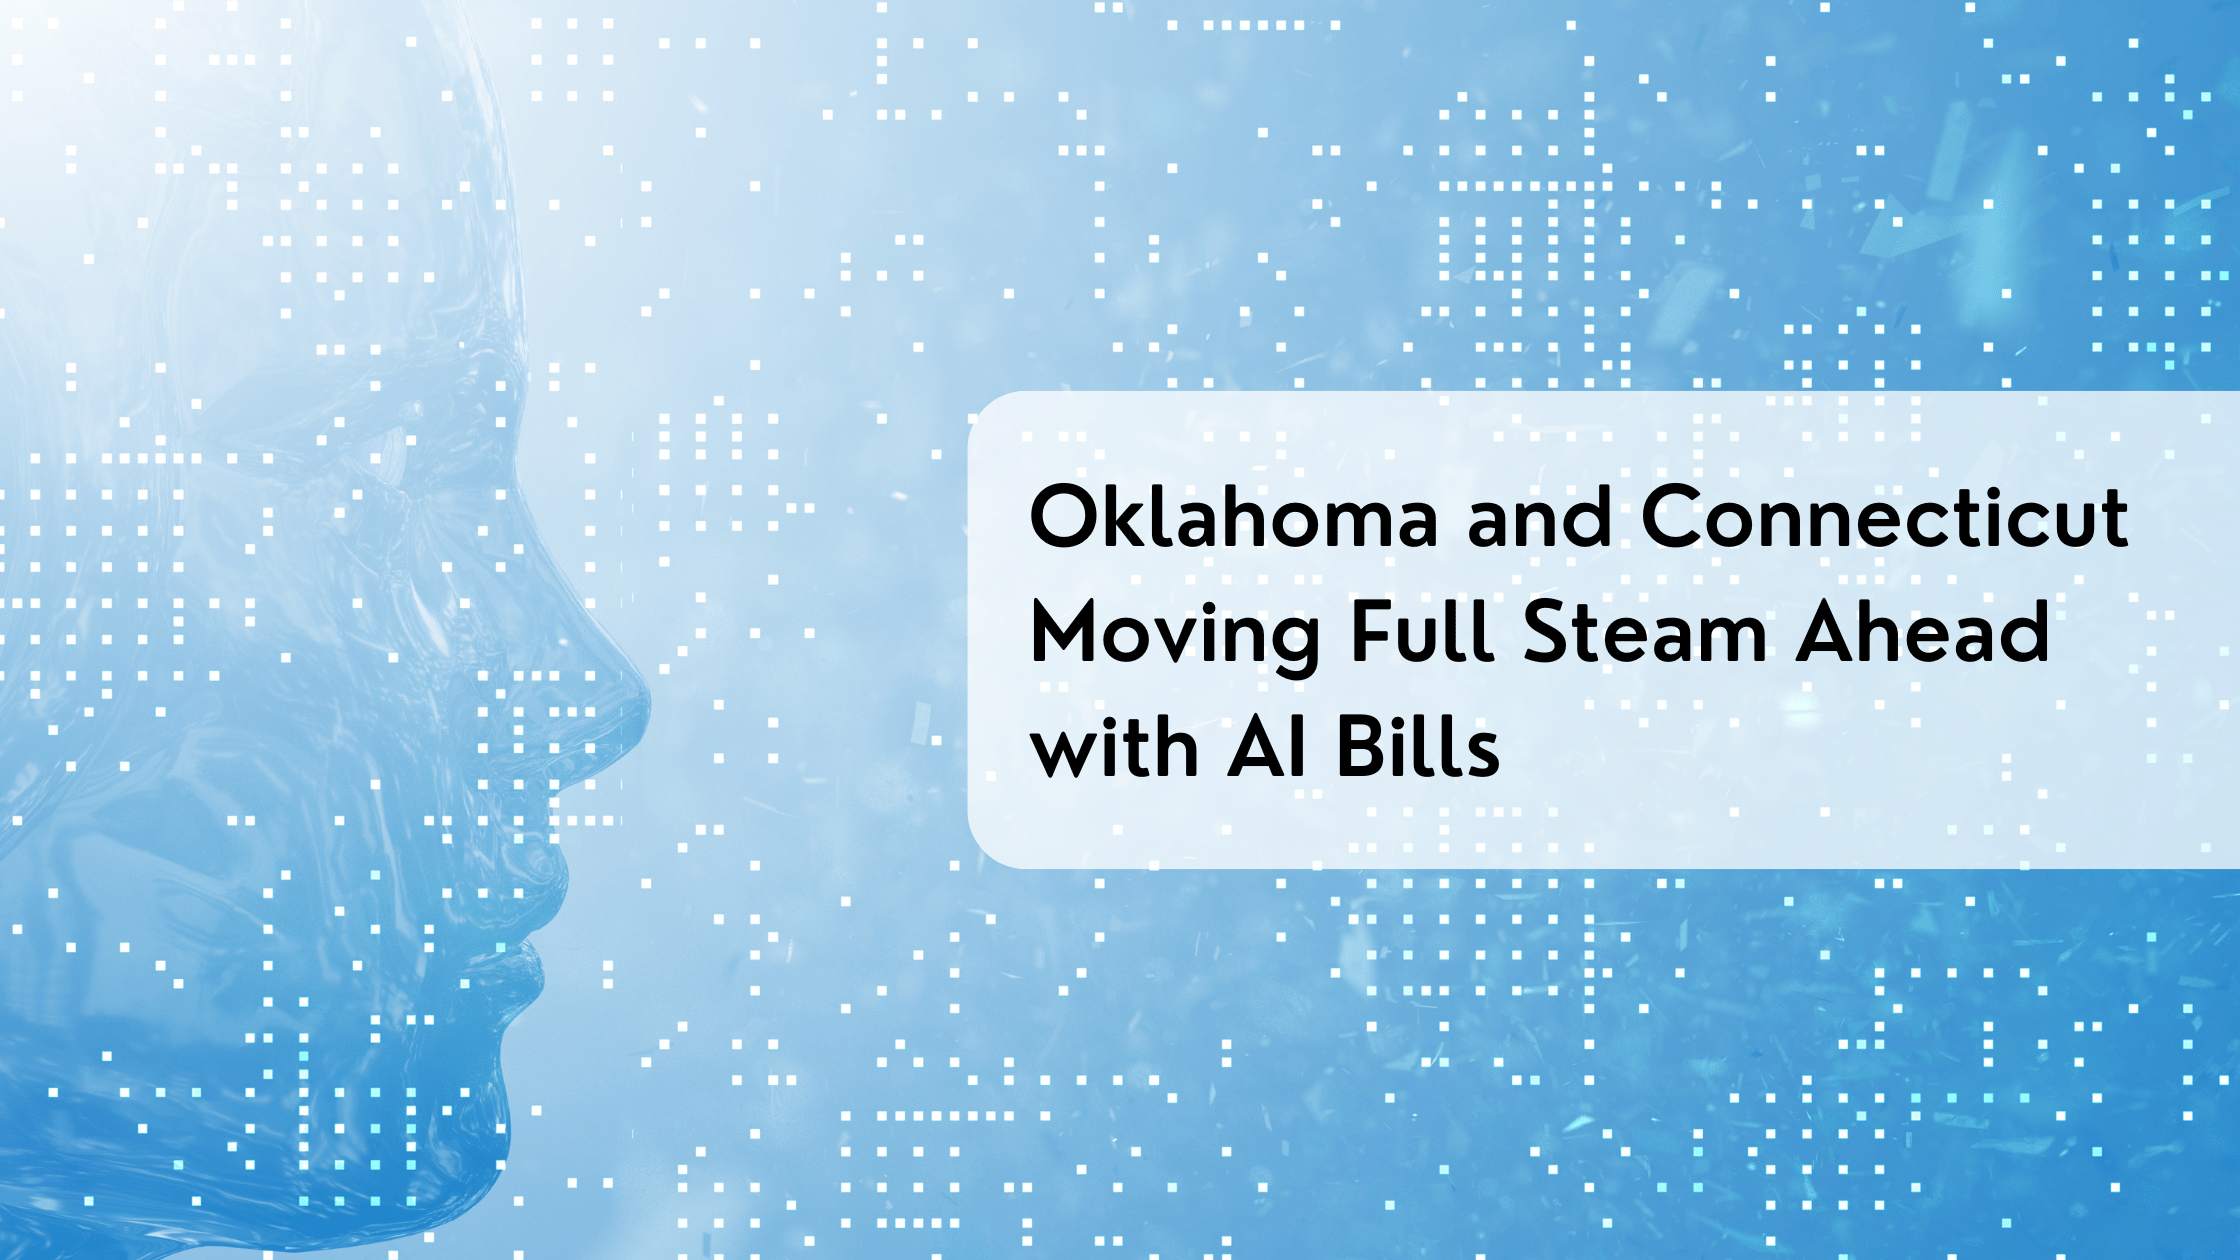 Oklahoma and Connecticut Moving Full Steam Ahead with AI Bills